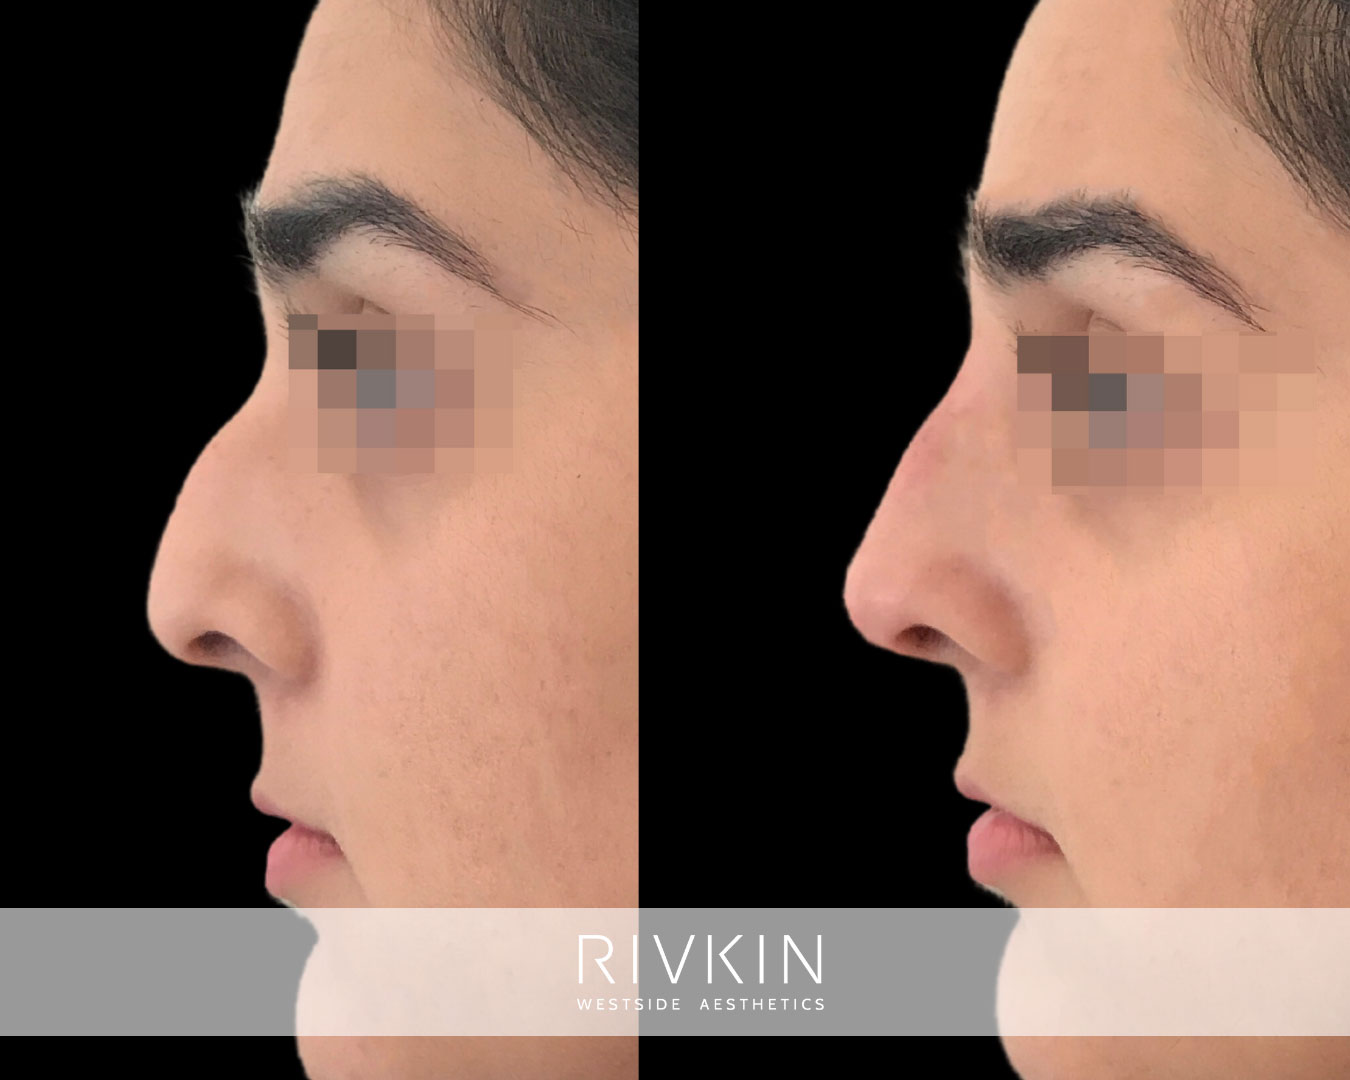 droopy tip, bump, middle eastern nose before and after image